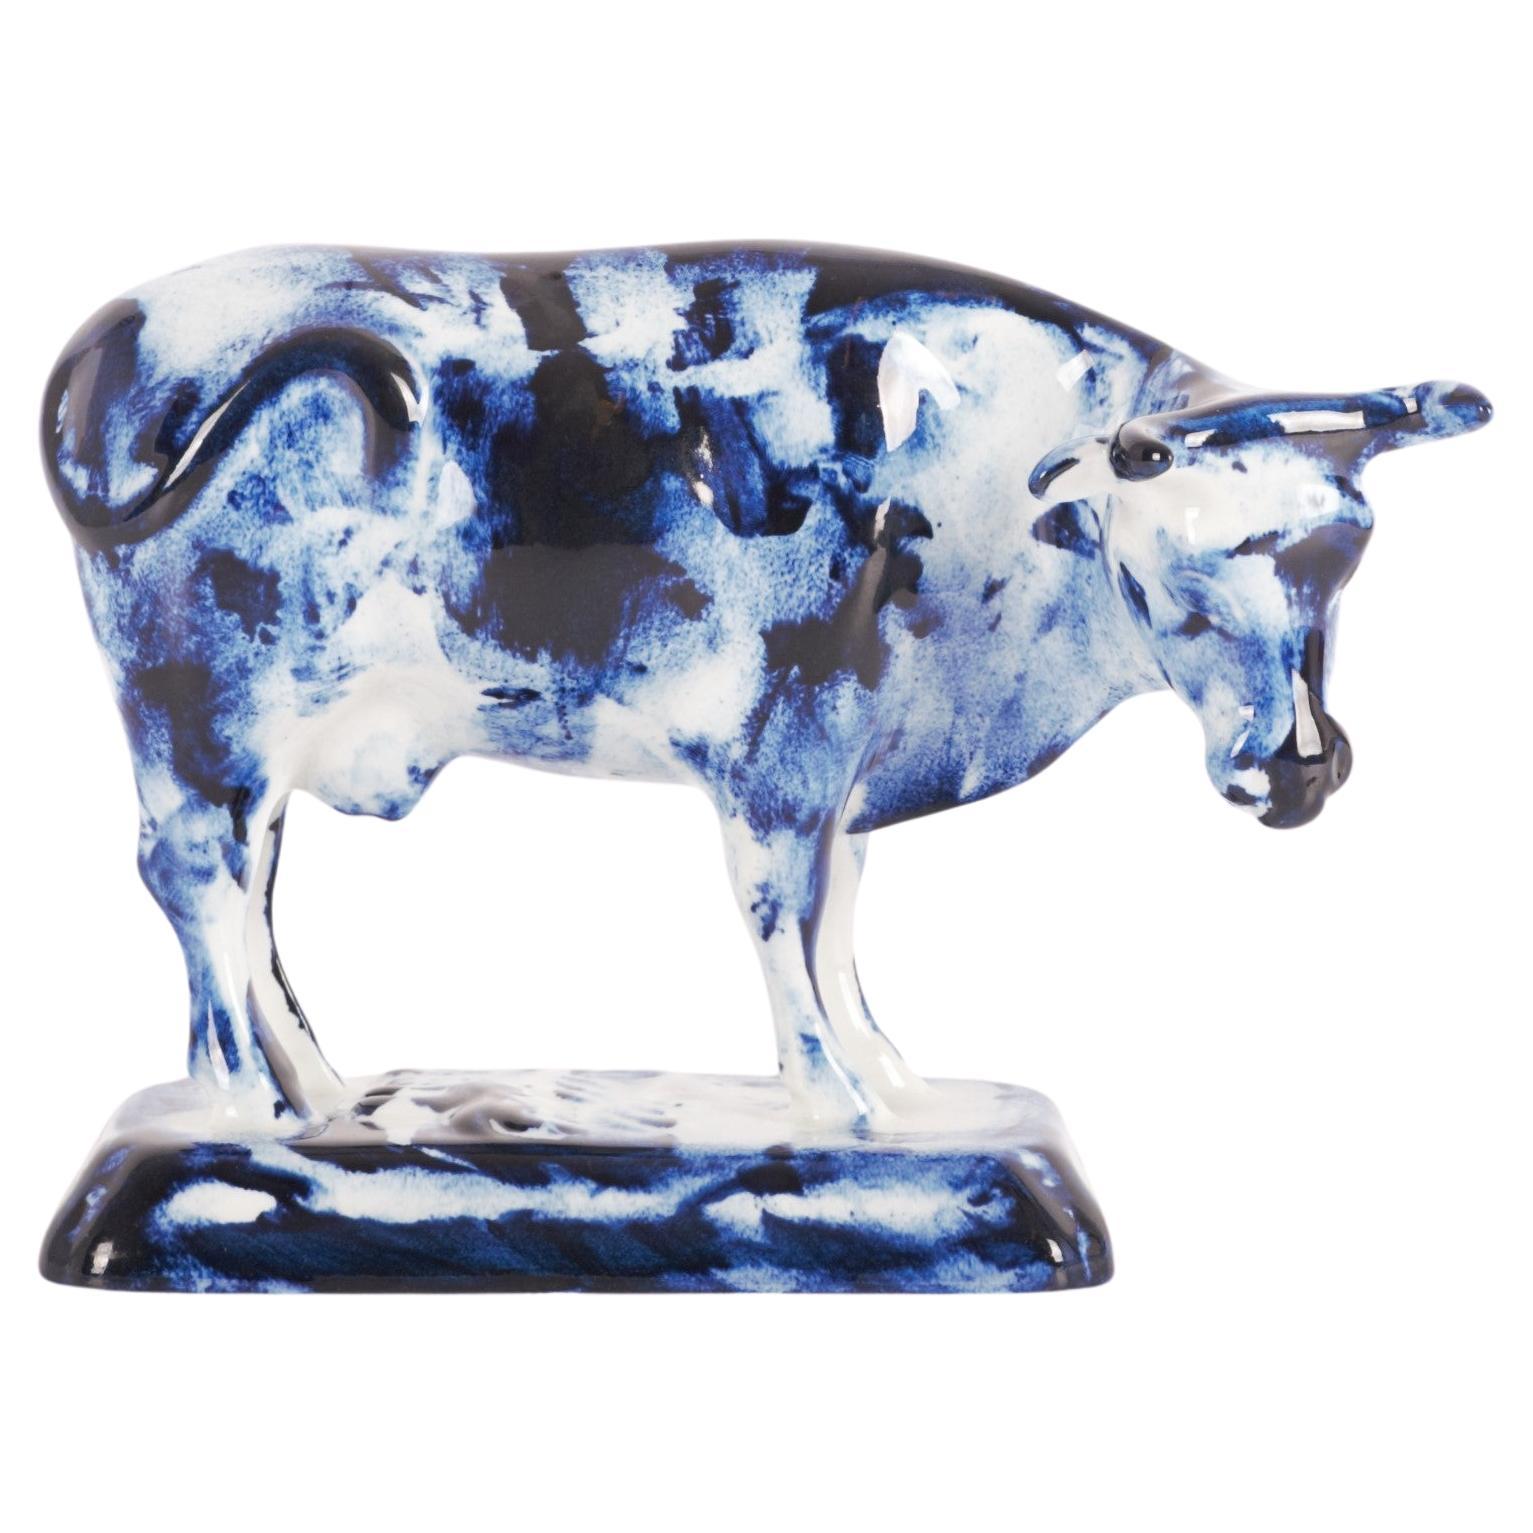 Delft Blue Cow #1, by Marcel Wanders, Hand Painted, 2006, Unique